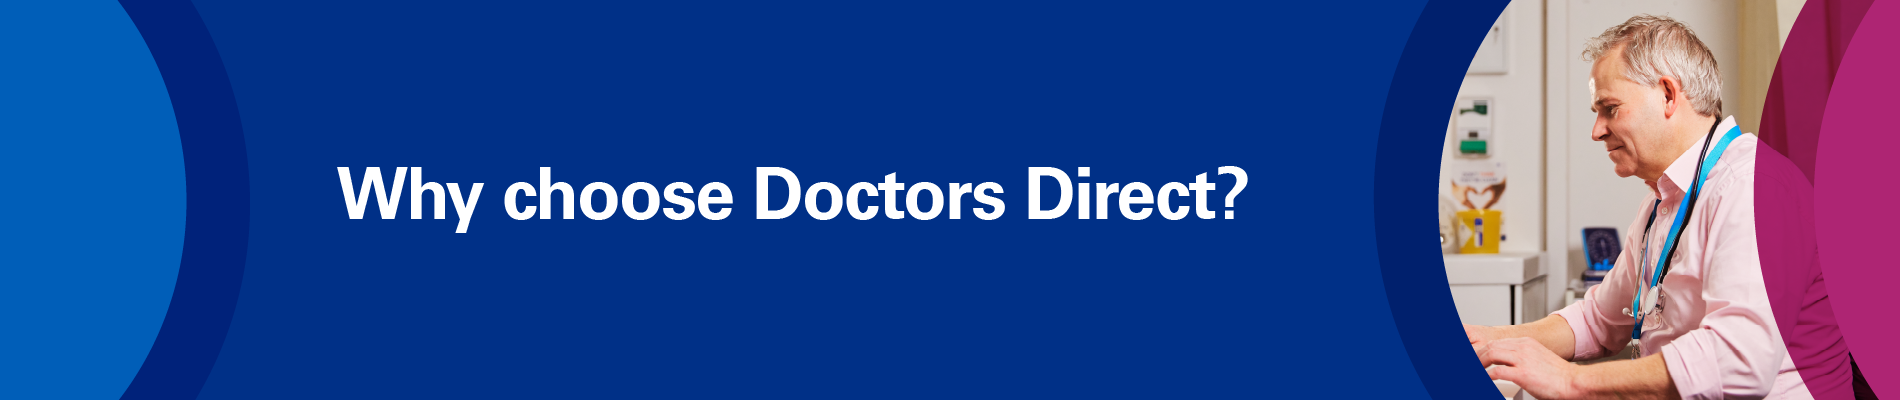 Why choose Doctors Direct page banner